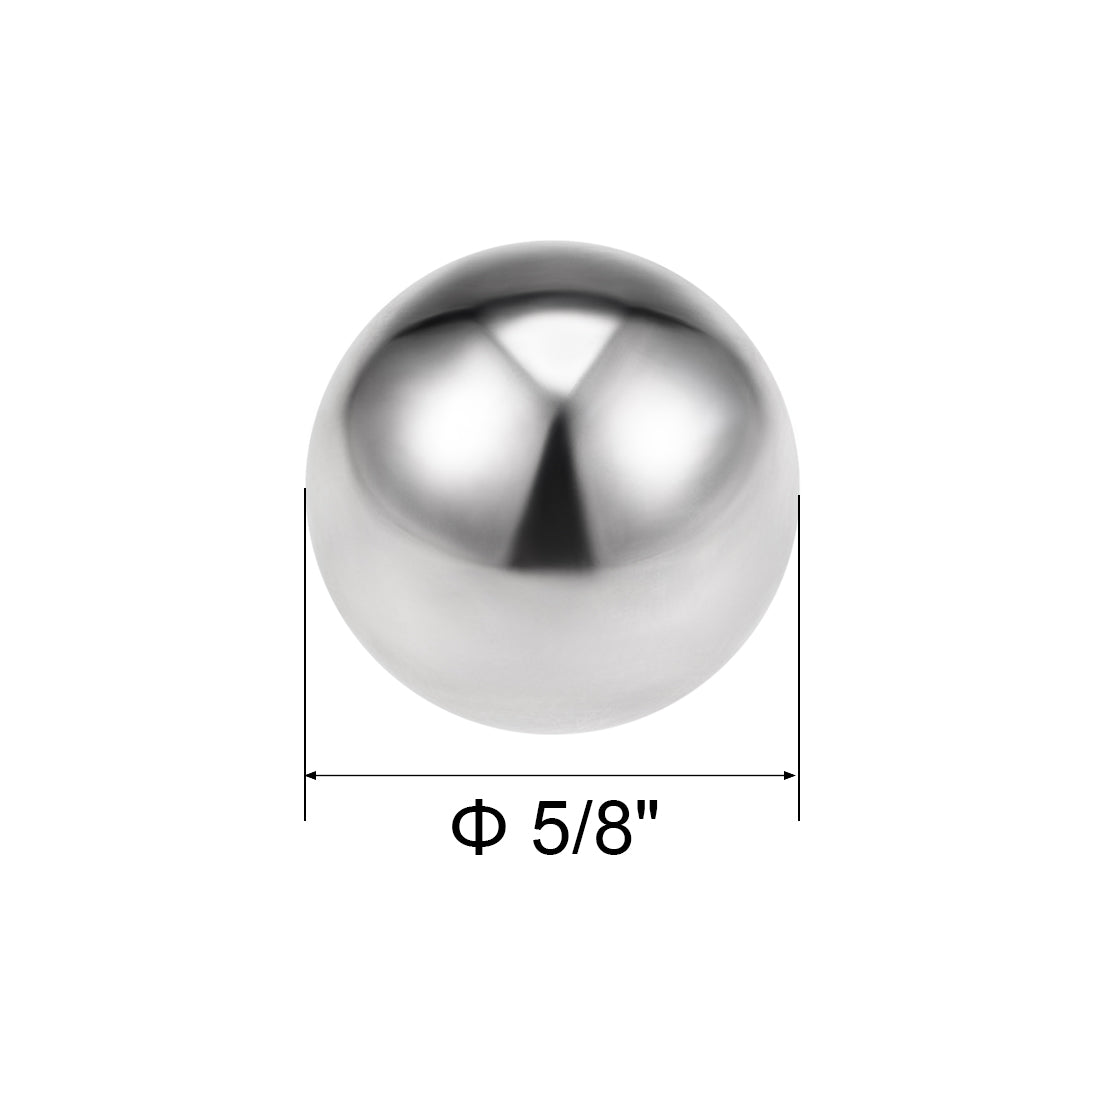 Uxcell Uxcell 3/8" Bearing Balls 440C Stainless Steel G25 Precision Balls 10pcs